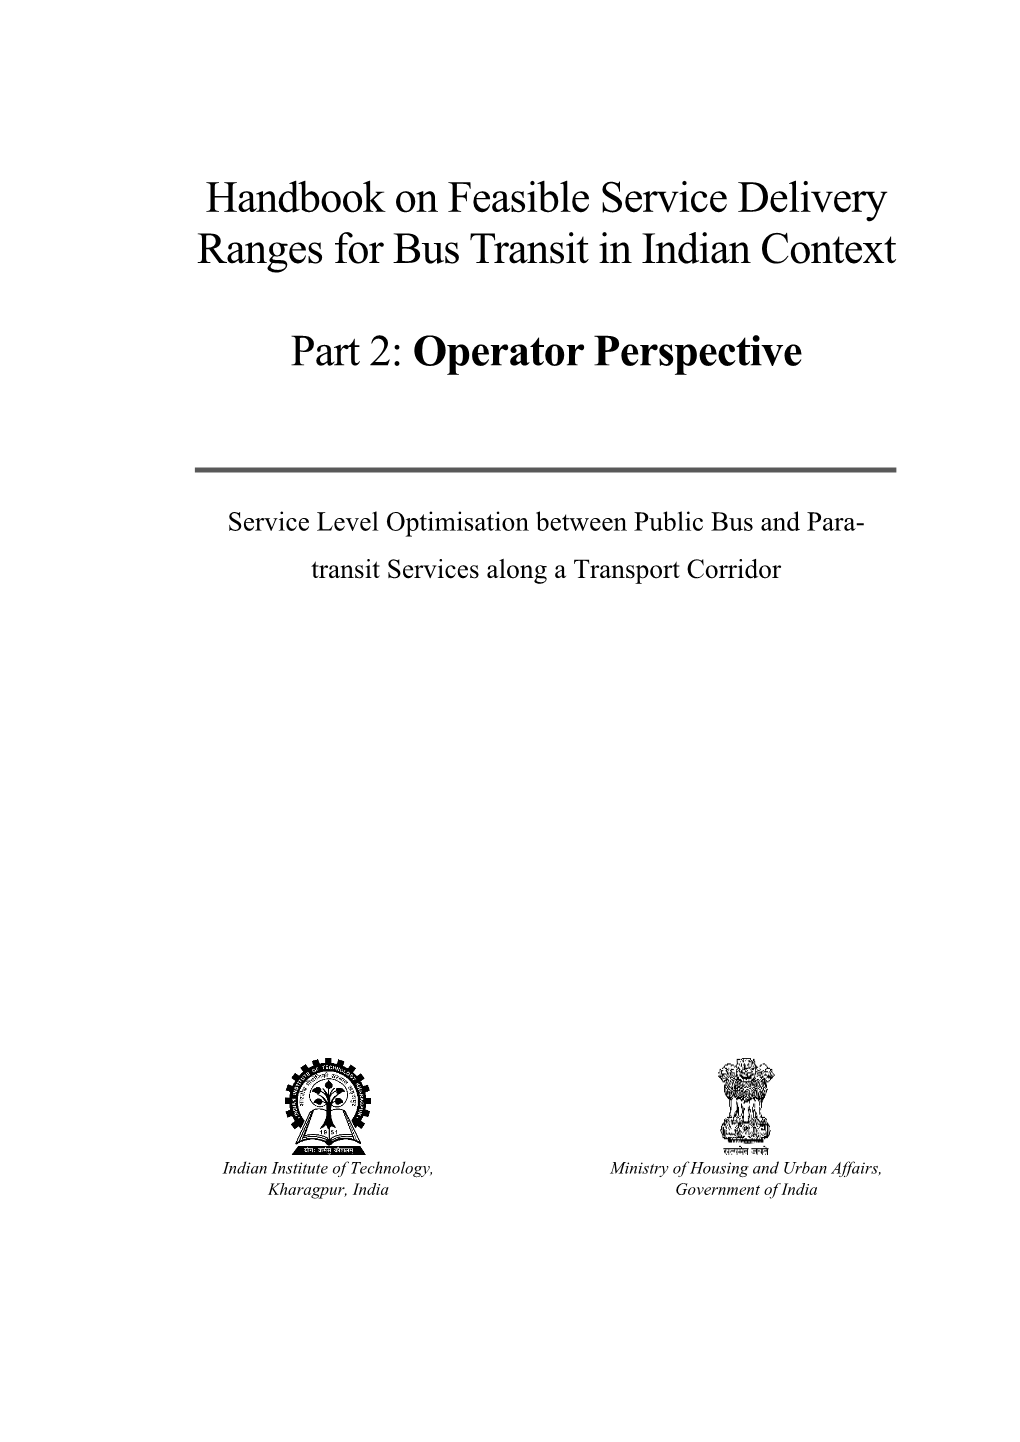 Handbook on Feasible Service Delivery Ranges for Bus Transit in Indian Context